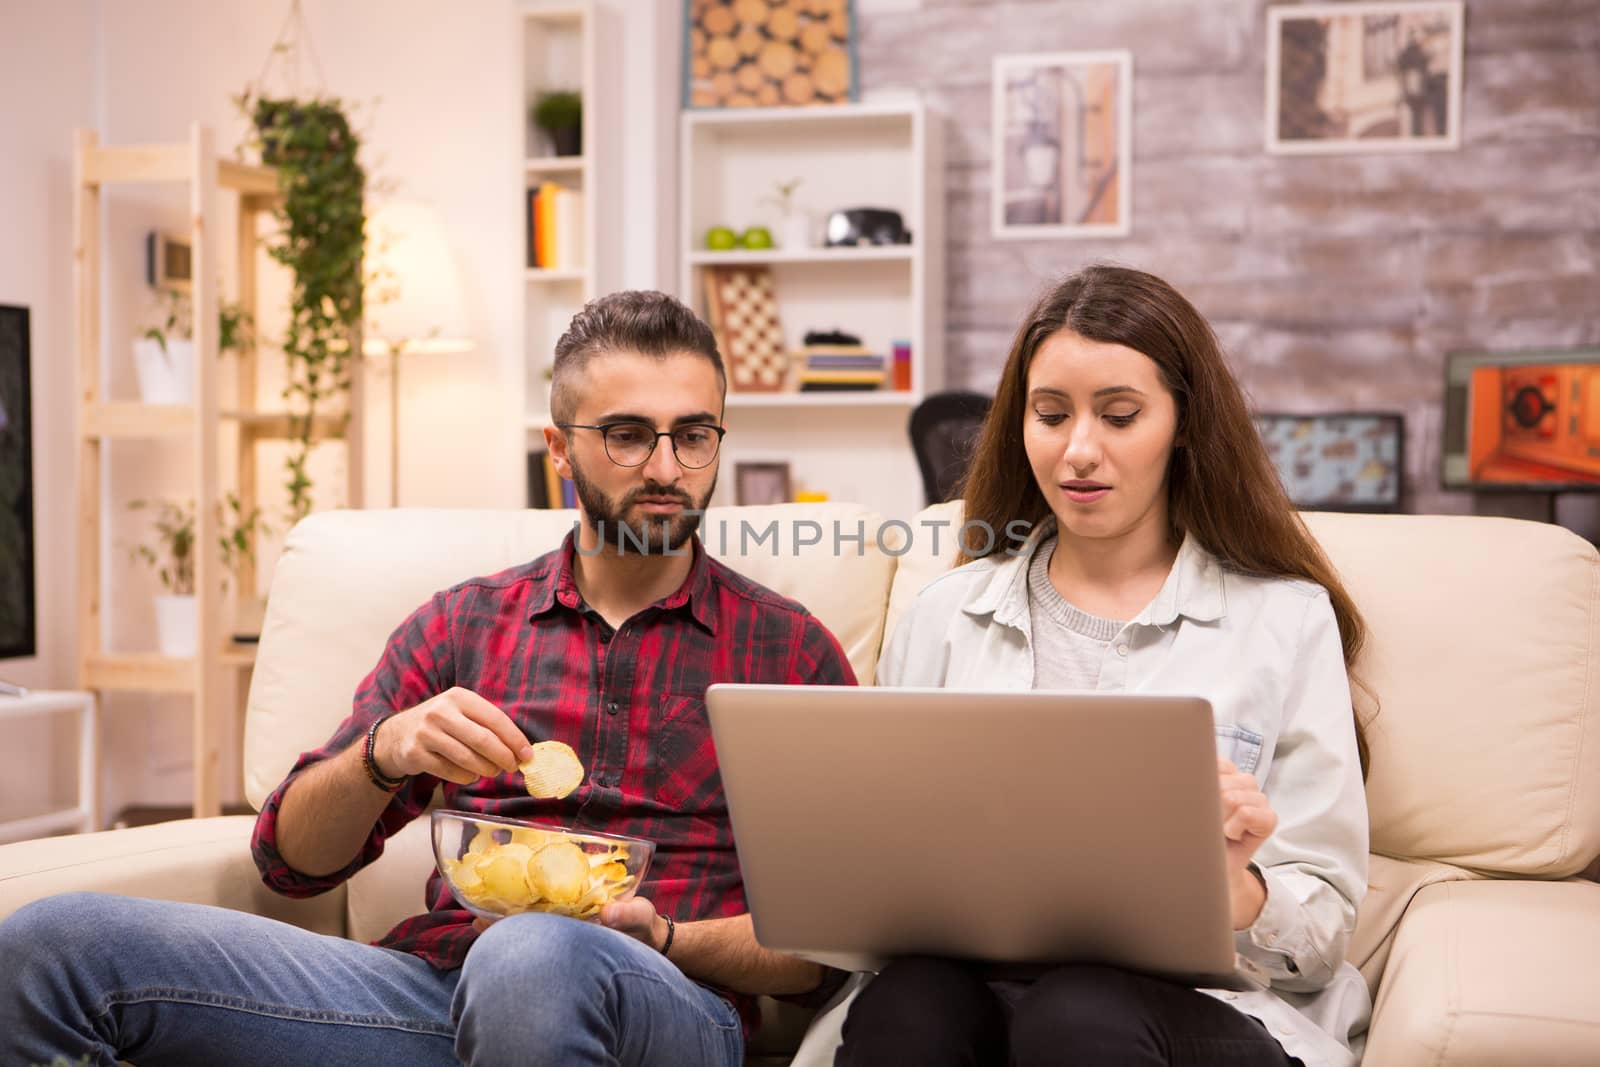 Boyfriend eating chips while his girlfriend is browsing on laptop. Couple sitting on couch.